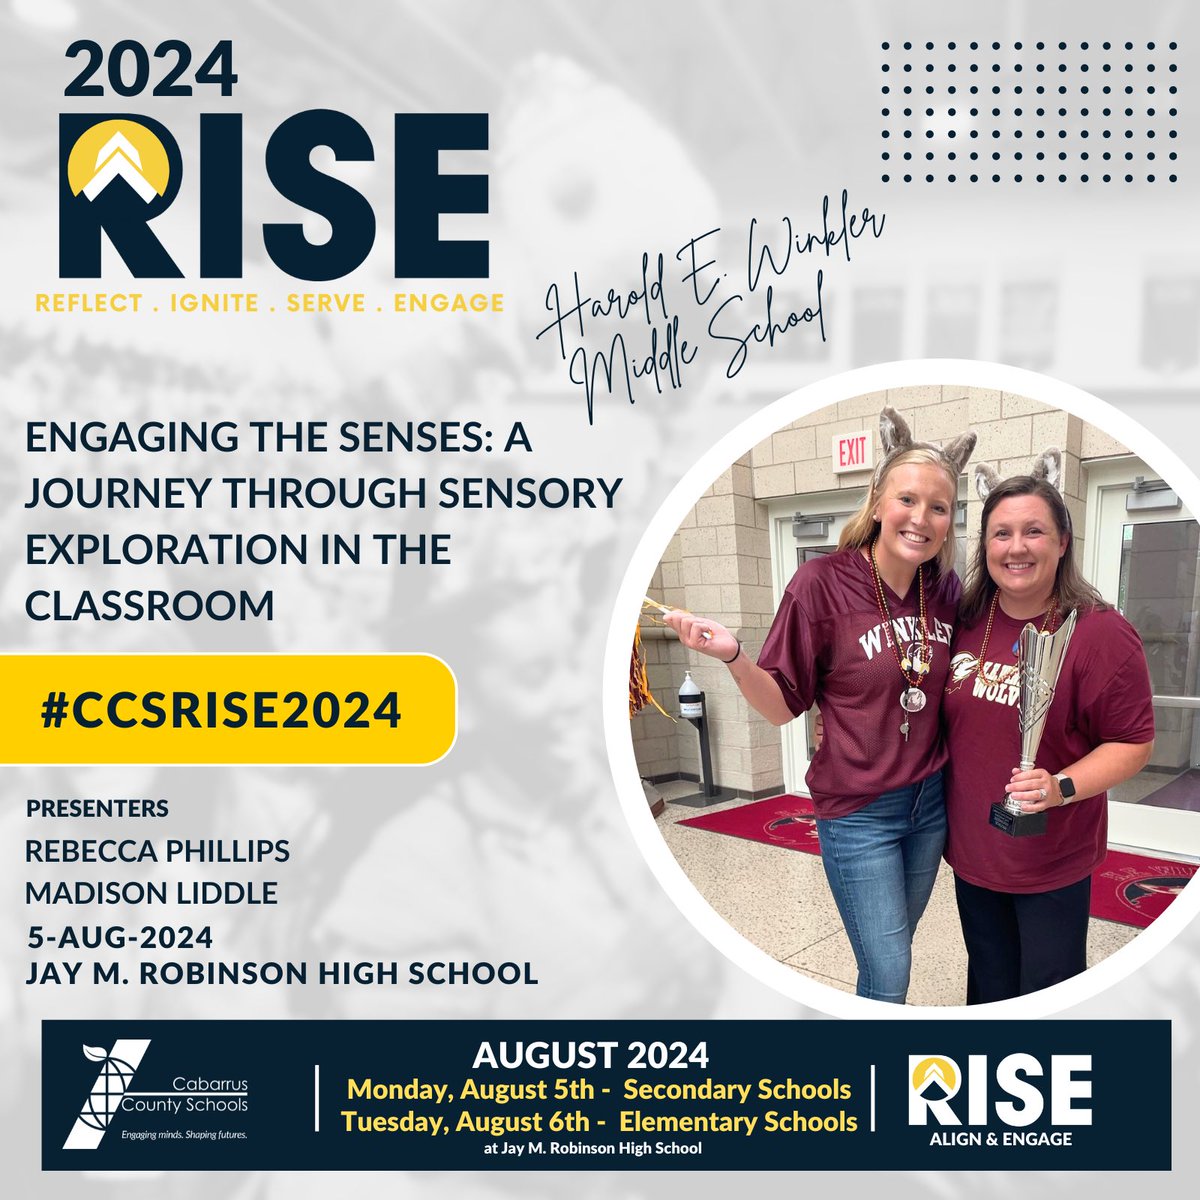 Super excited to represent @haroldwinklerms and present at CCS RISE 2024 alongside @PrincipalPDot ! 🐺✨#CCSRISE2024 #RunWithThePack